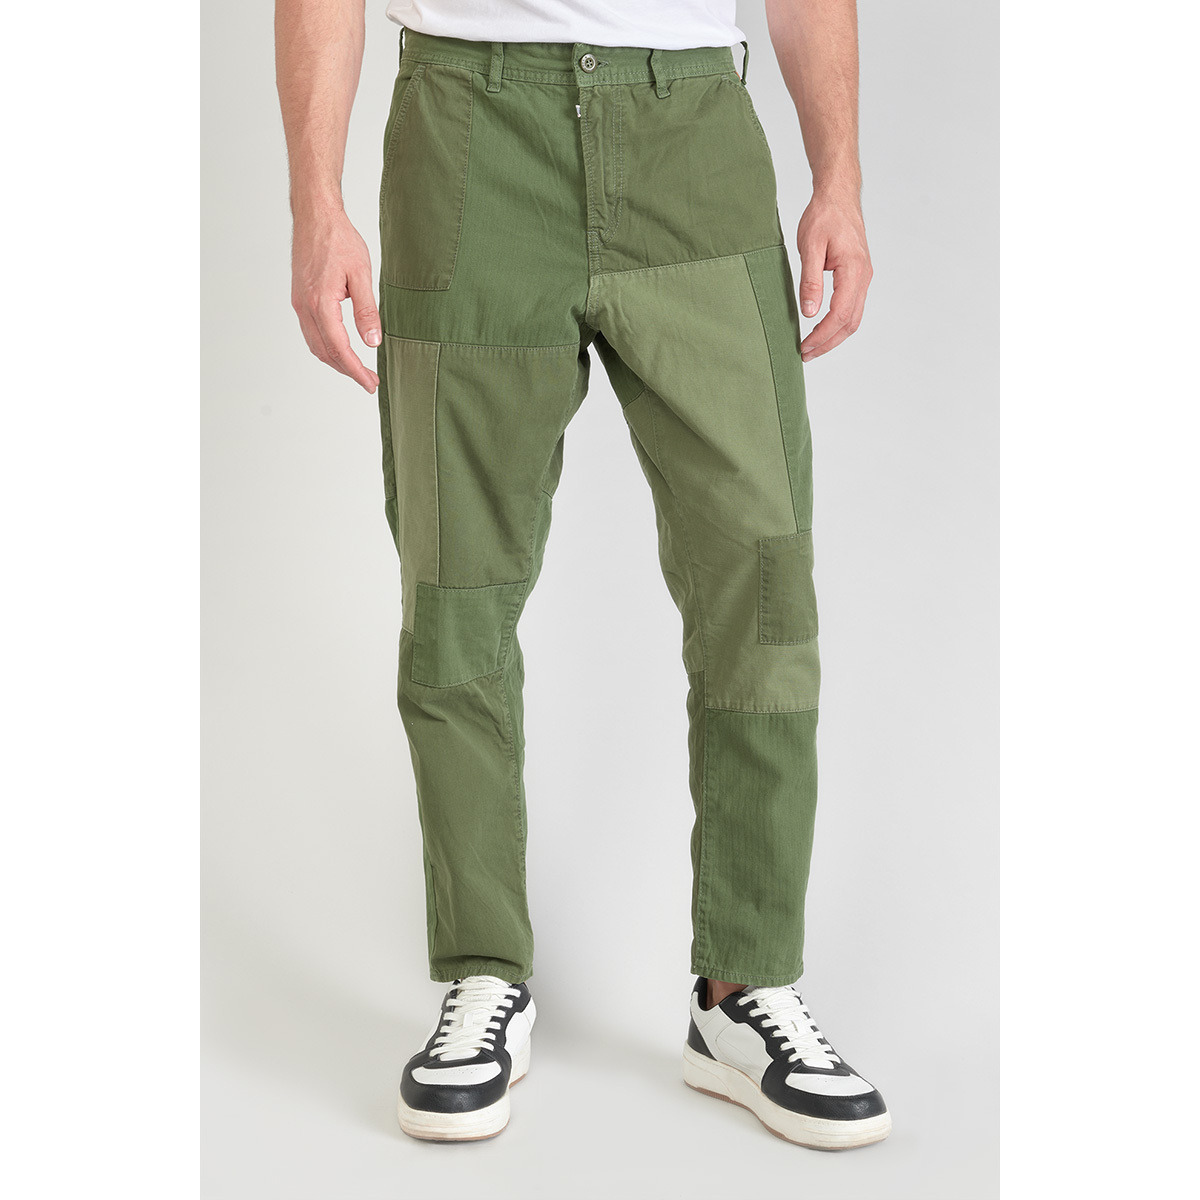 Le Temps des Cerises Green Trousers for Men from Spartoo GOOFASH